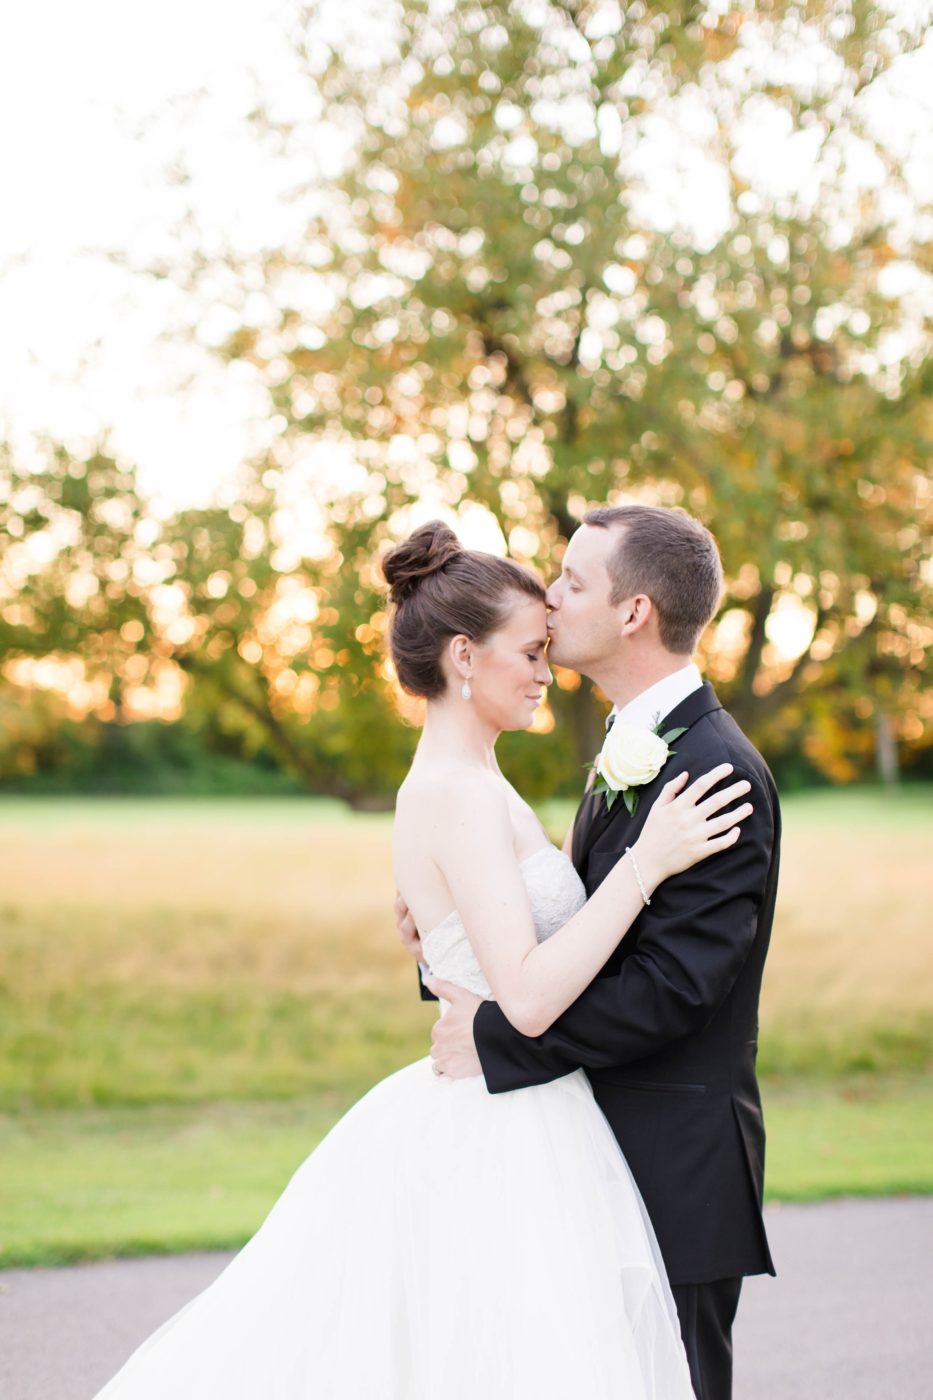 Groom giving his bride a kiss on the forehead as the sun gentle sets in the background while they stand in a field. 